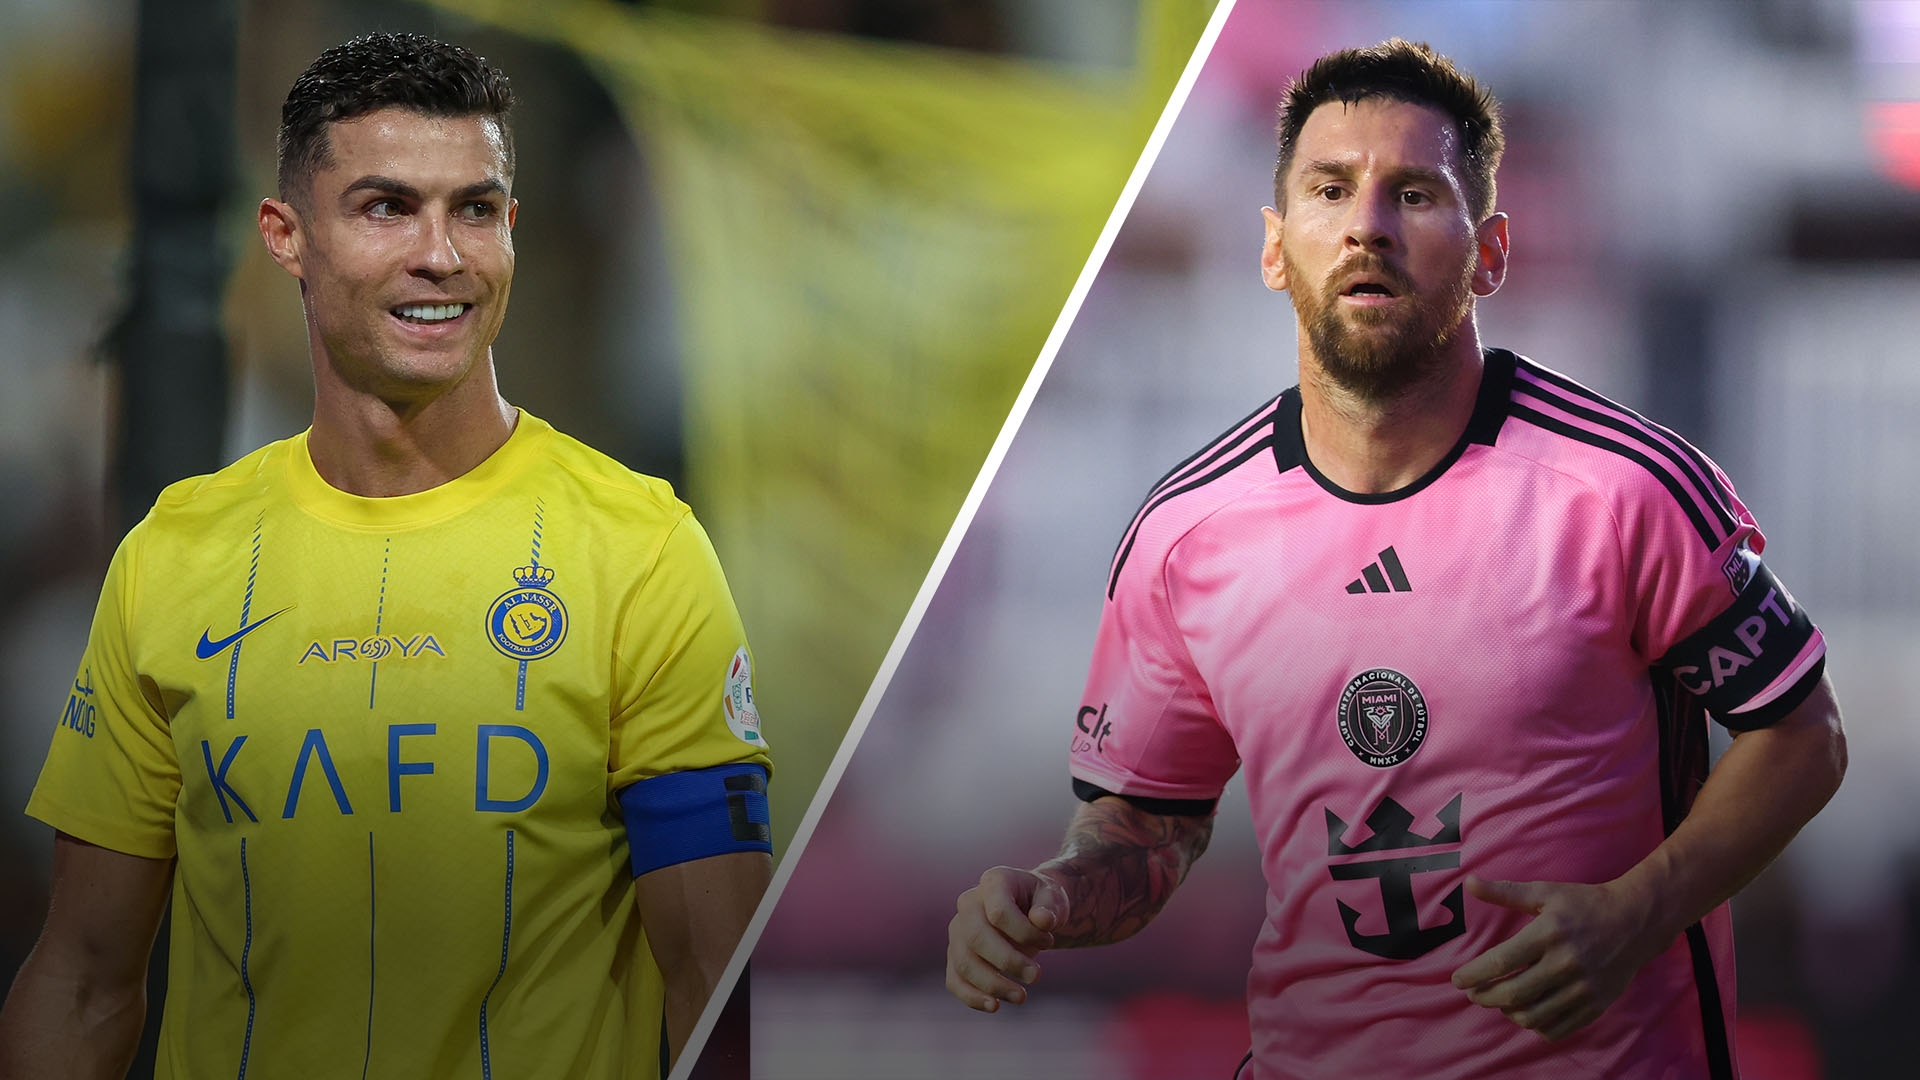 Is Ronaldo in better form than Messi going into summer?